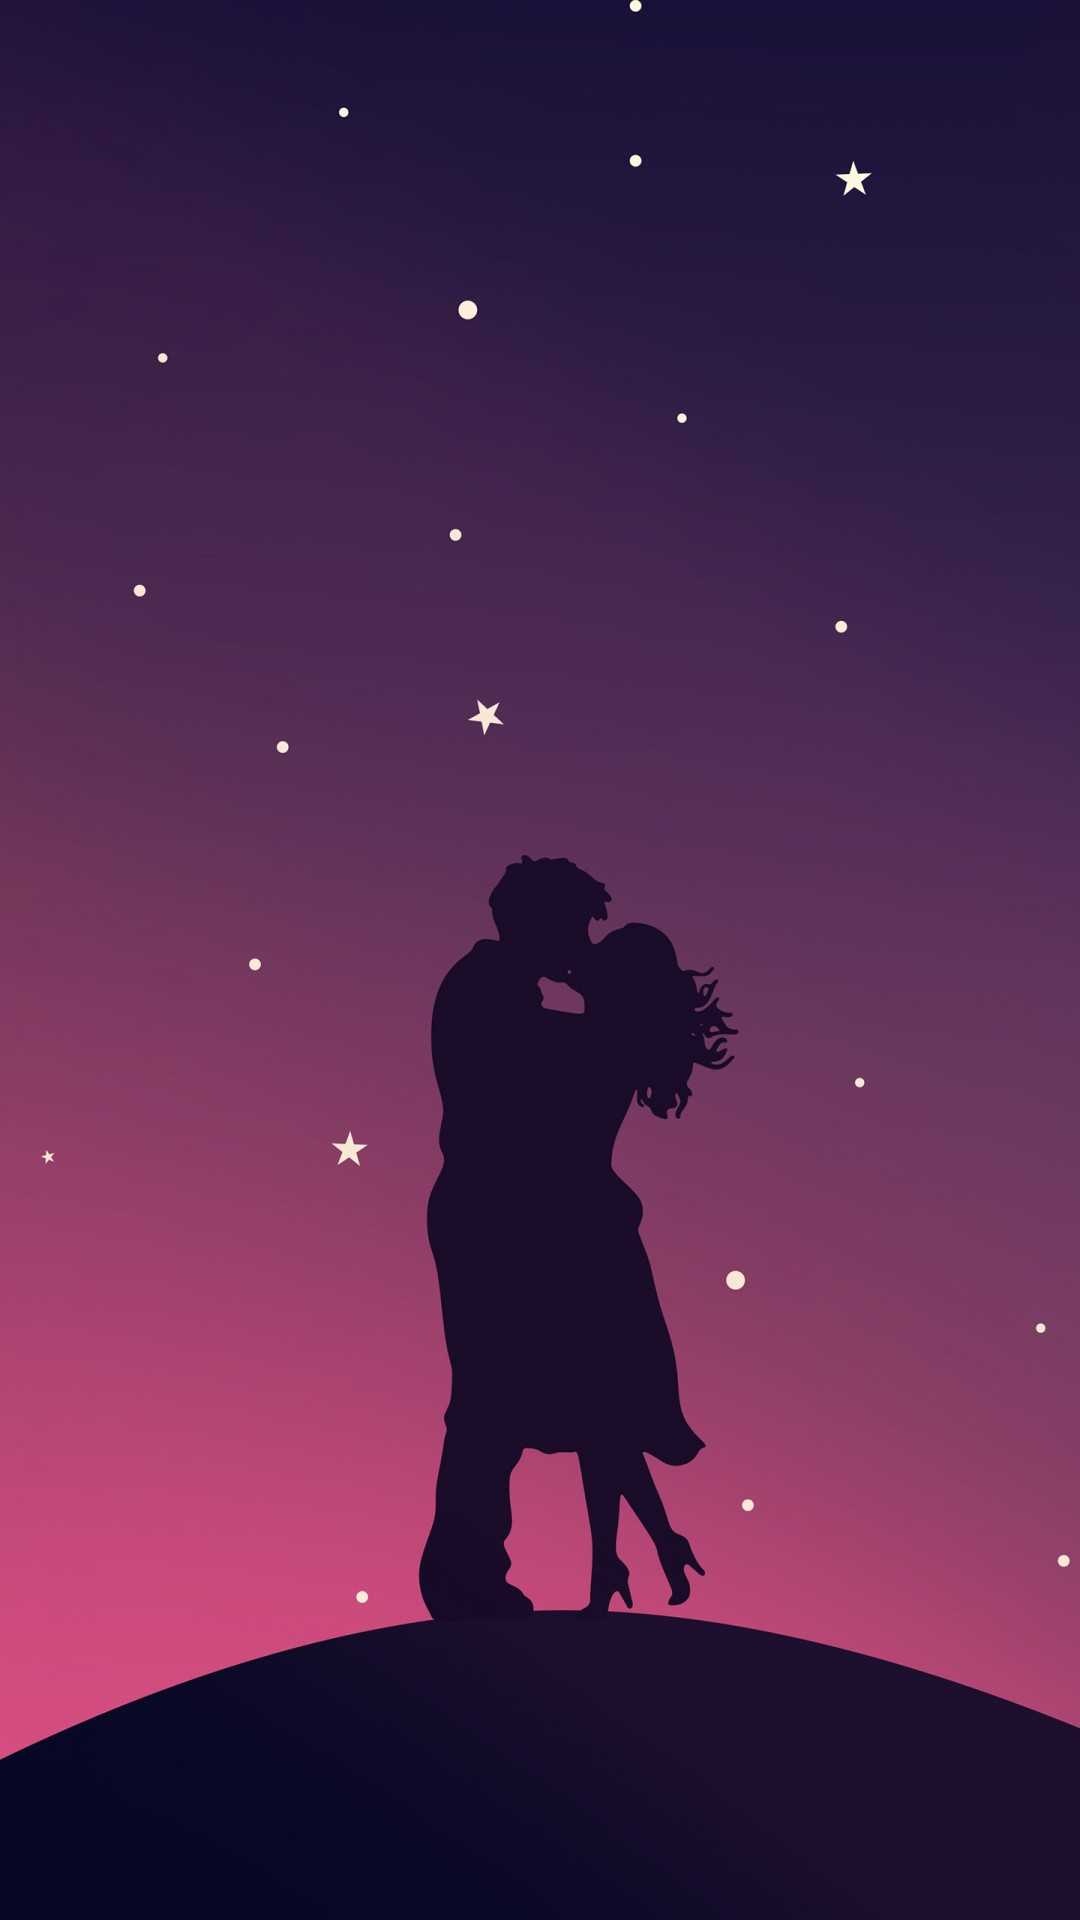 Couple wallpaper, Images, Photos, Love, 1080x1920 Full HD Phone